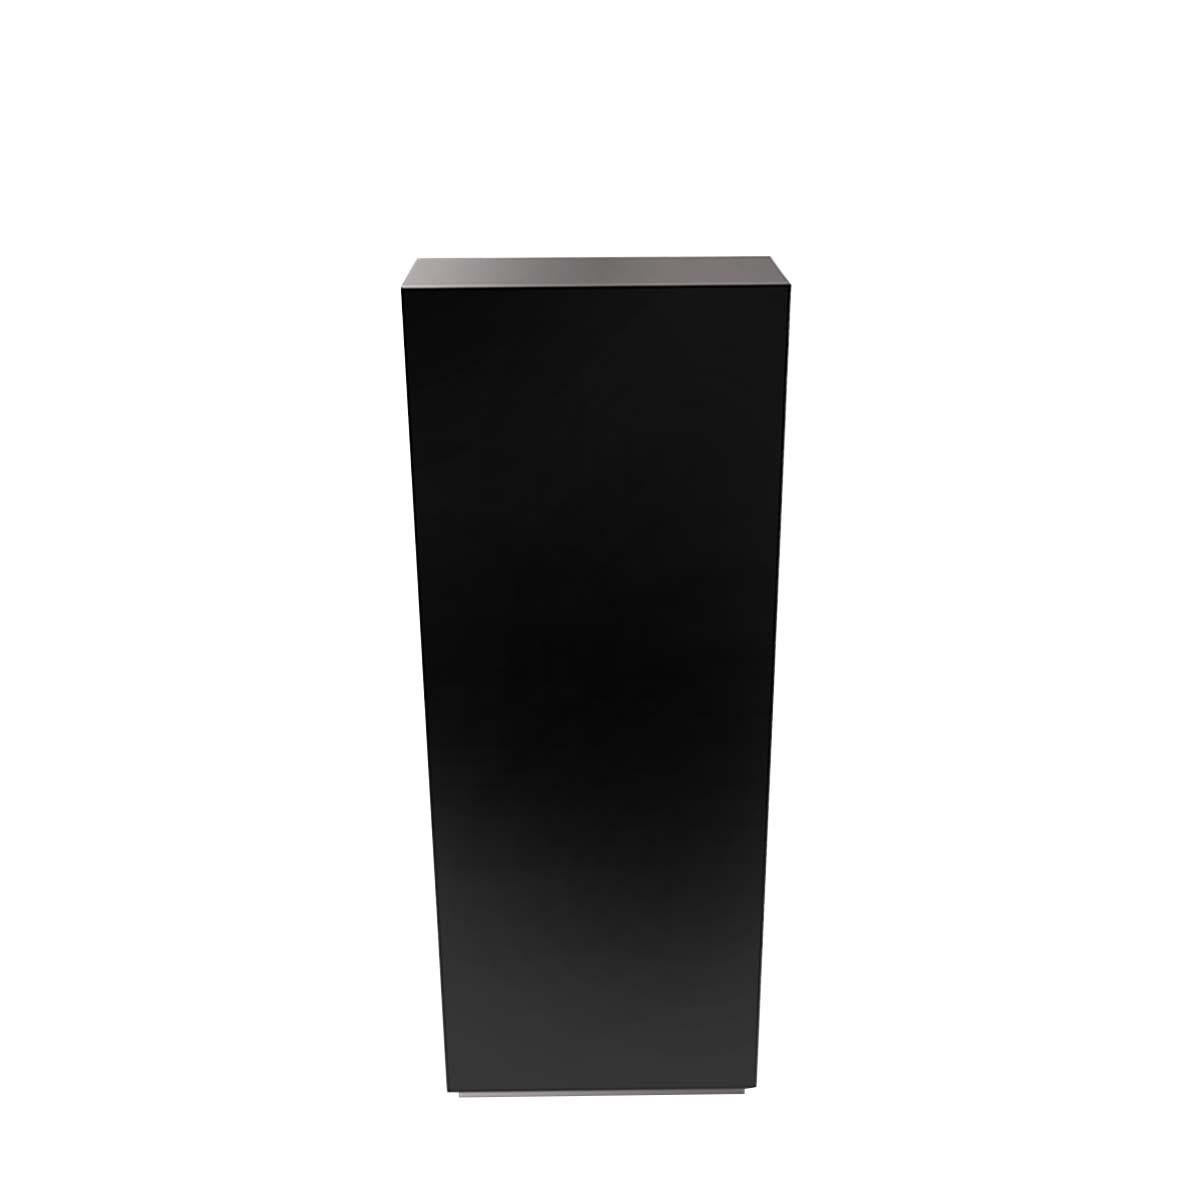 Pedestal black lak with solid wood
structure in black lacquered finish.